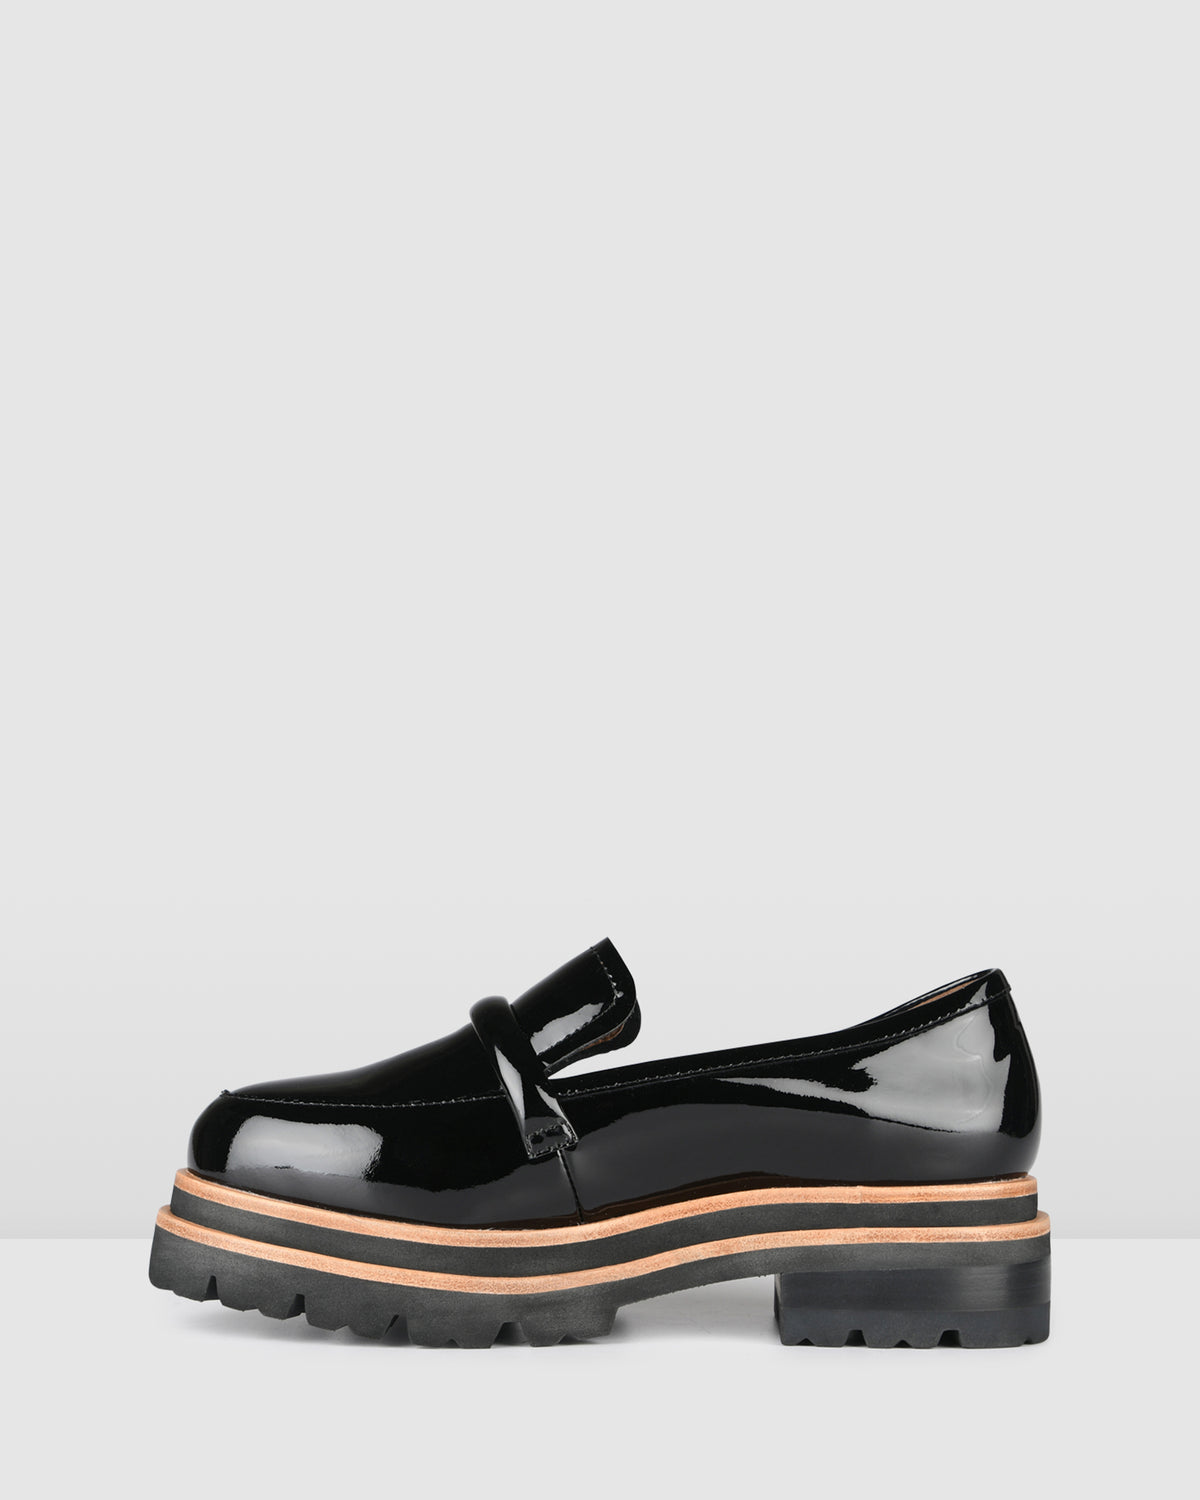 BELLE LOAFERS BLACK PATENT